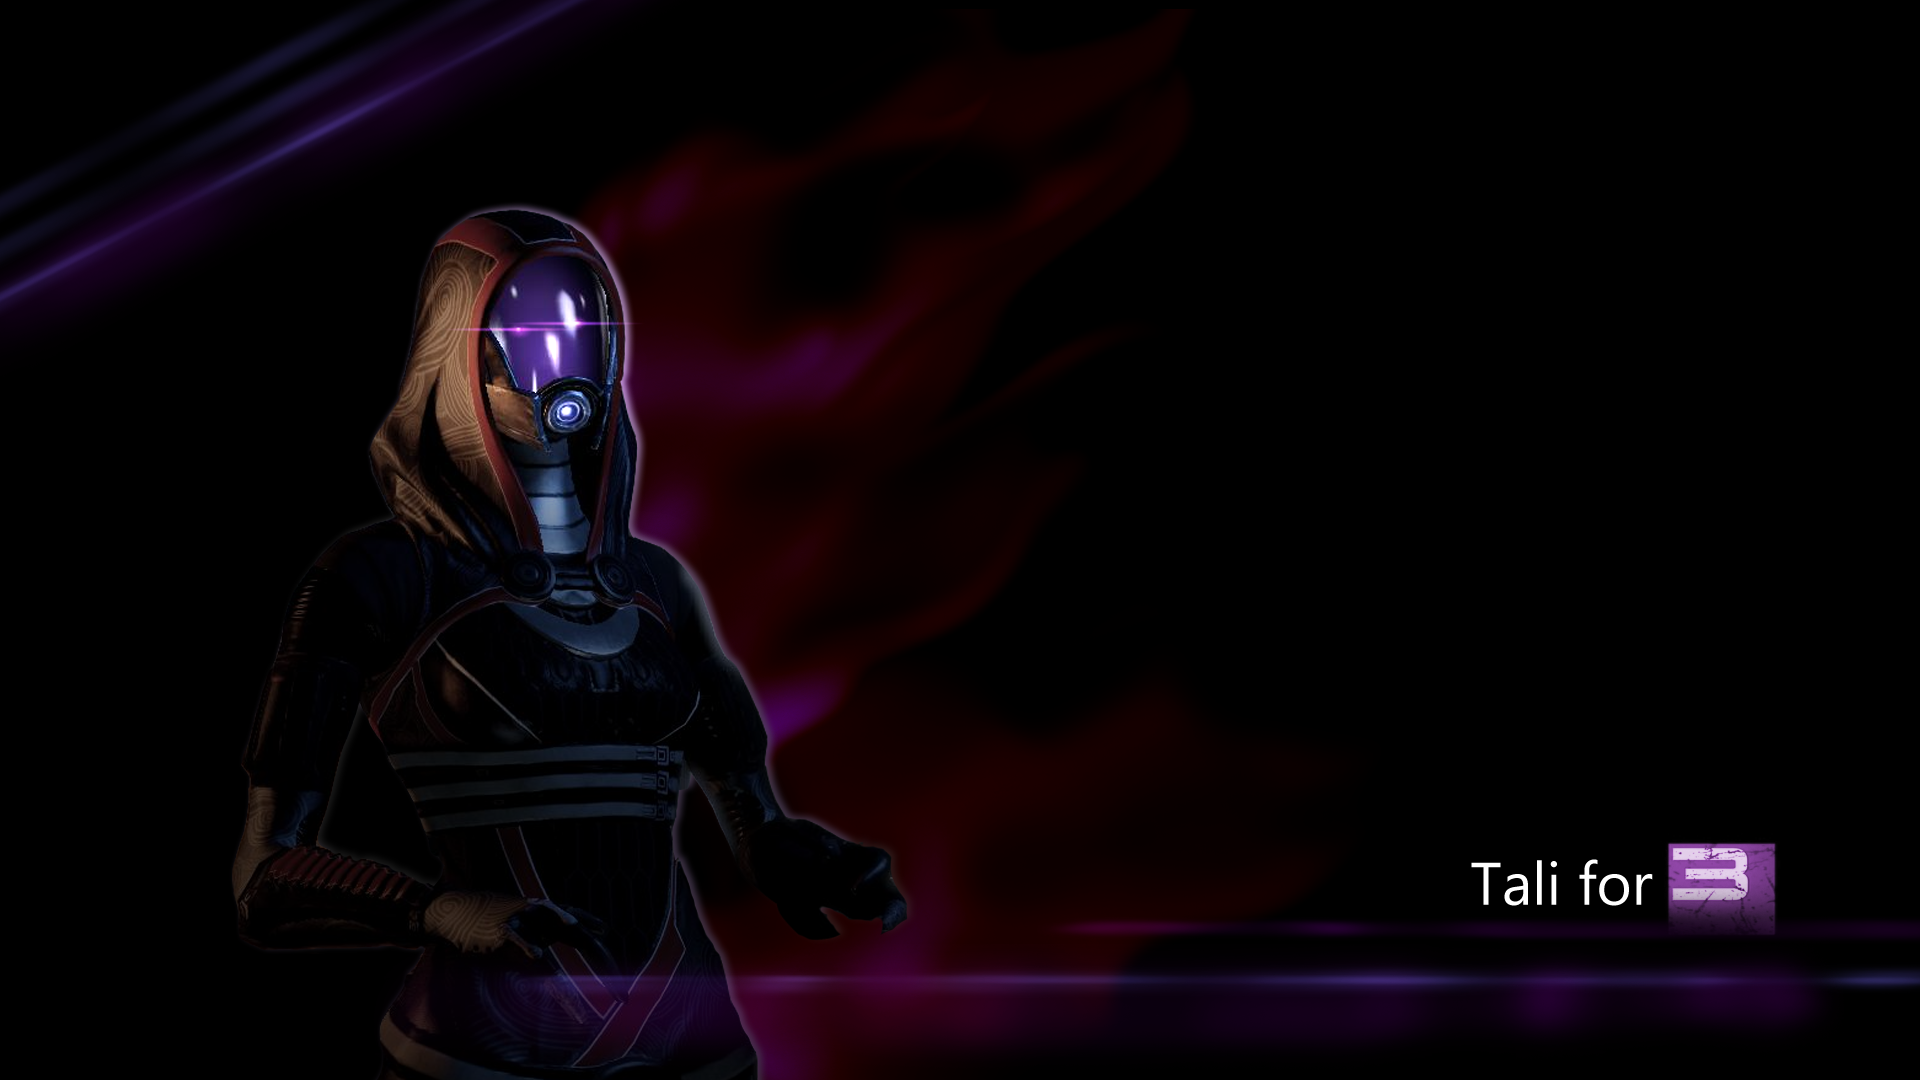 tali_for_mass_effect_3_by_hingjonwallpapers-d3brrl8.png